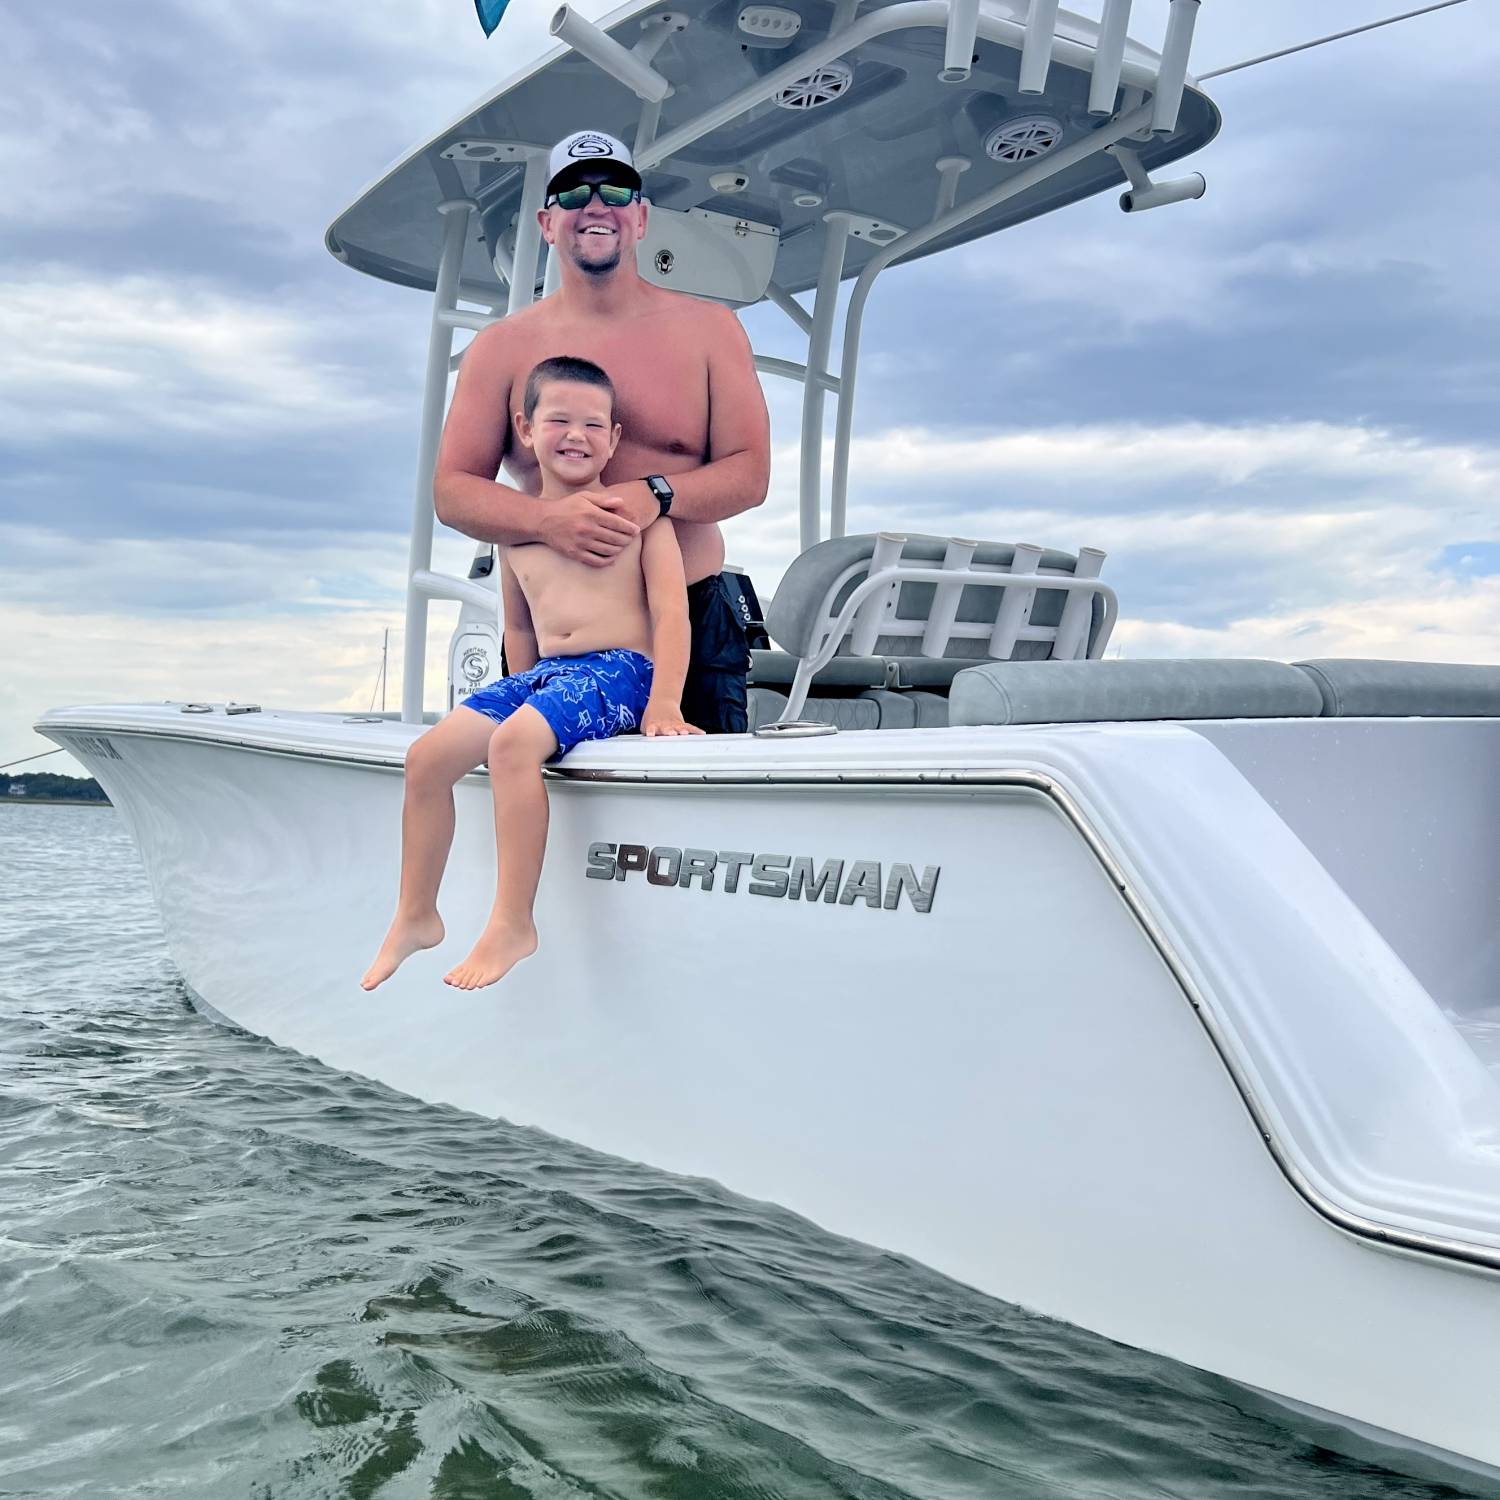 Dad and son (5 years old) enjoying a day at the sandbar catching minnows and crabs and showing...